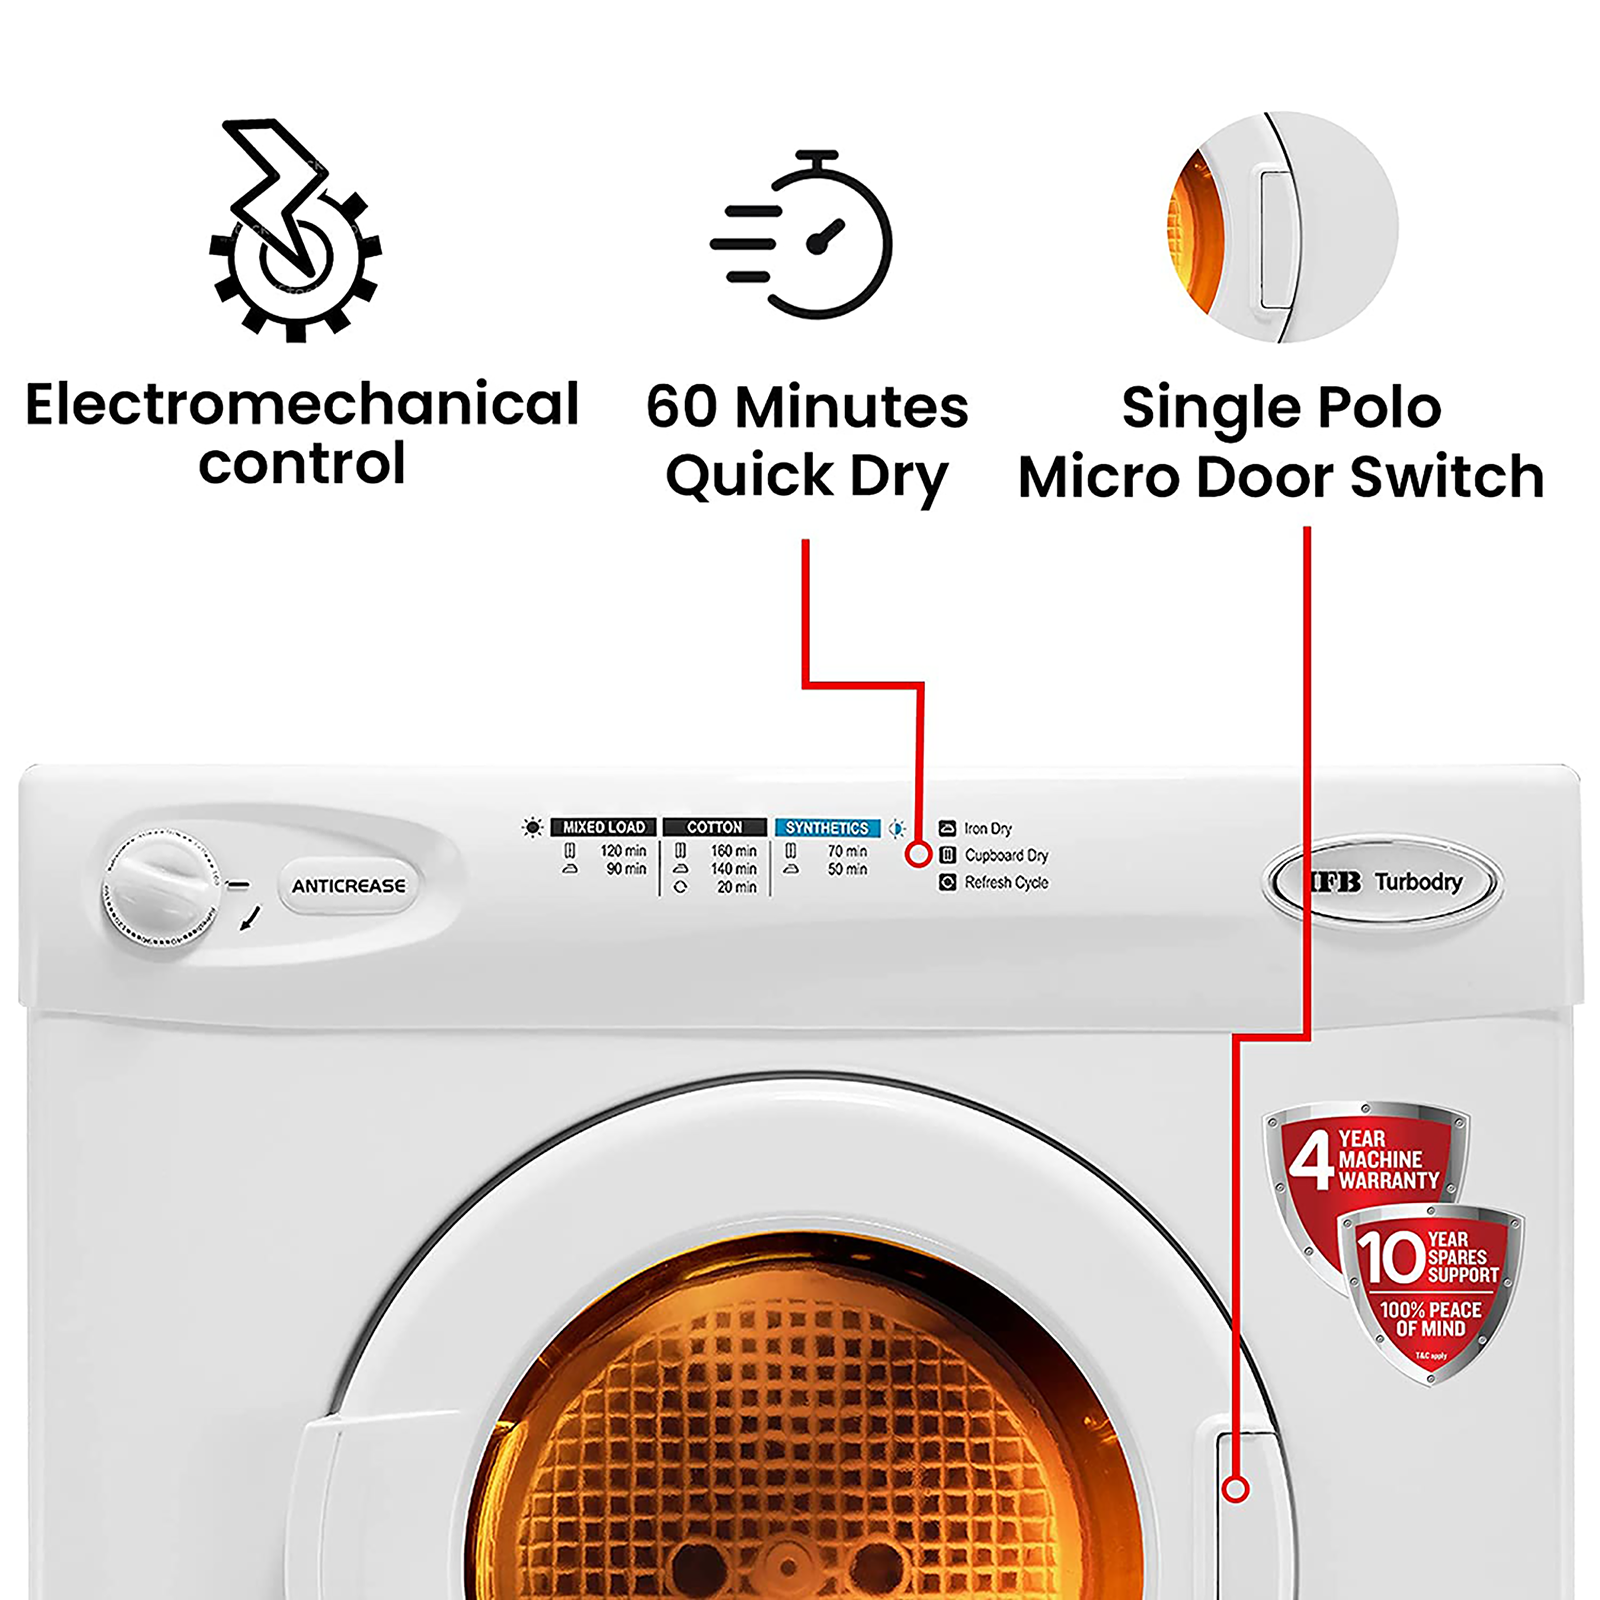 IFB 5.5 kg with 99.9% Dry Clothes Dryer with In-built Heater White Price in  India - Buy IFB 5.5 kg with 99.9% Dry Clothes Dryer with In-built Heater  White online at